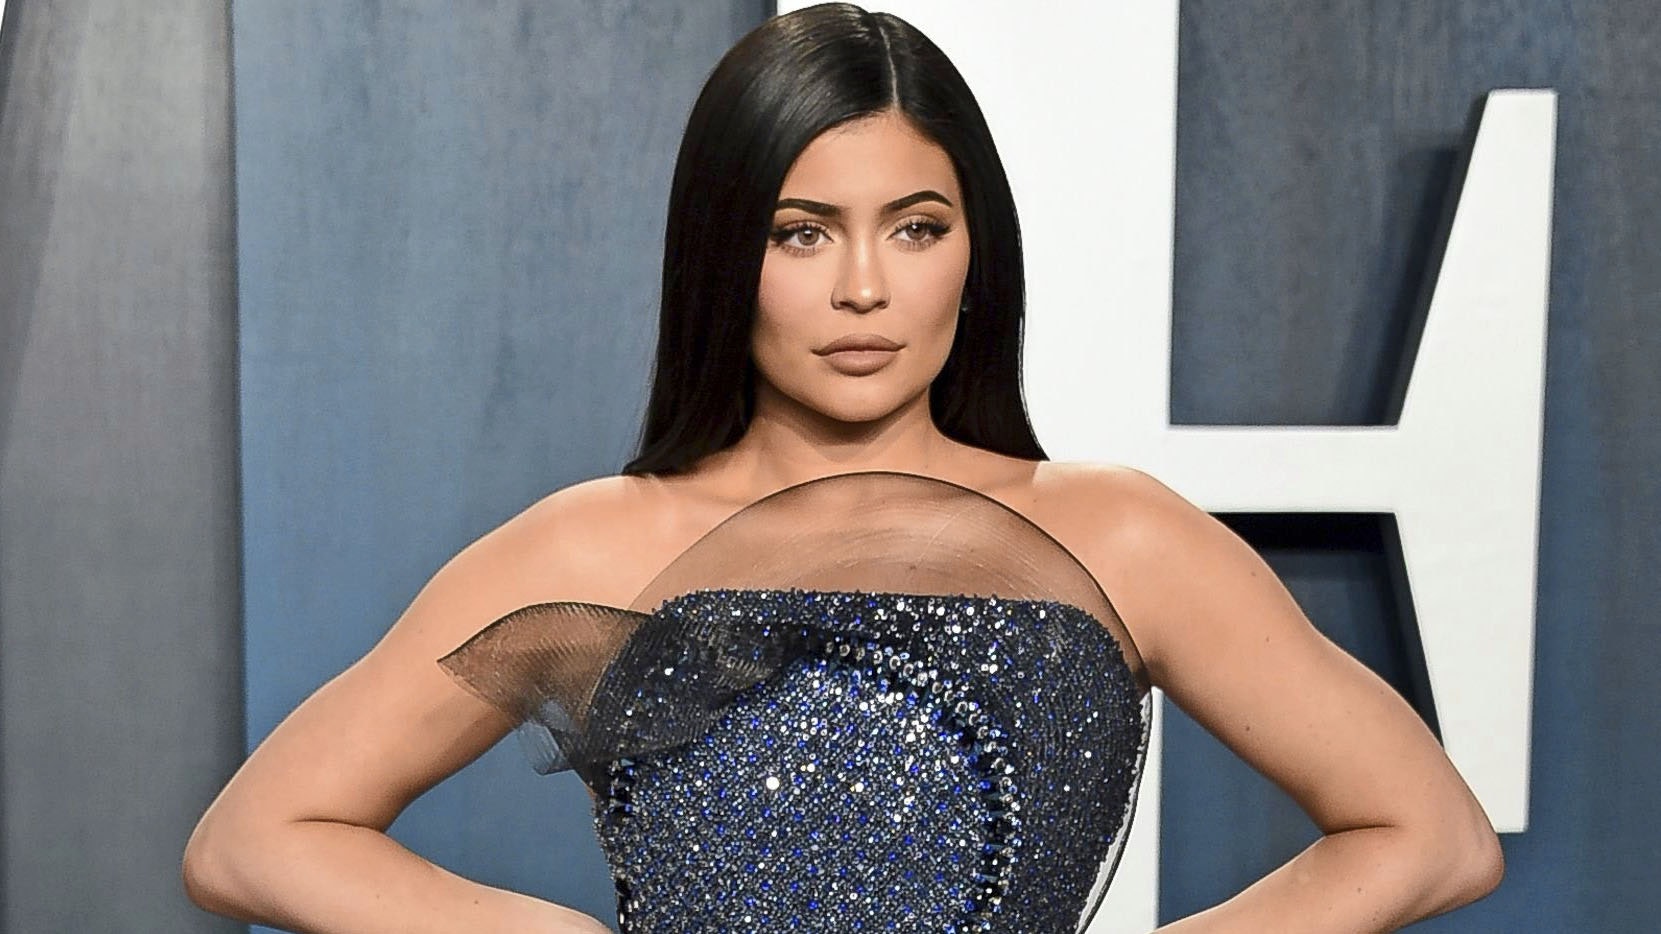 Kylie Jenner takes fans on tour of glamorous closets filled with